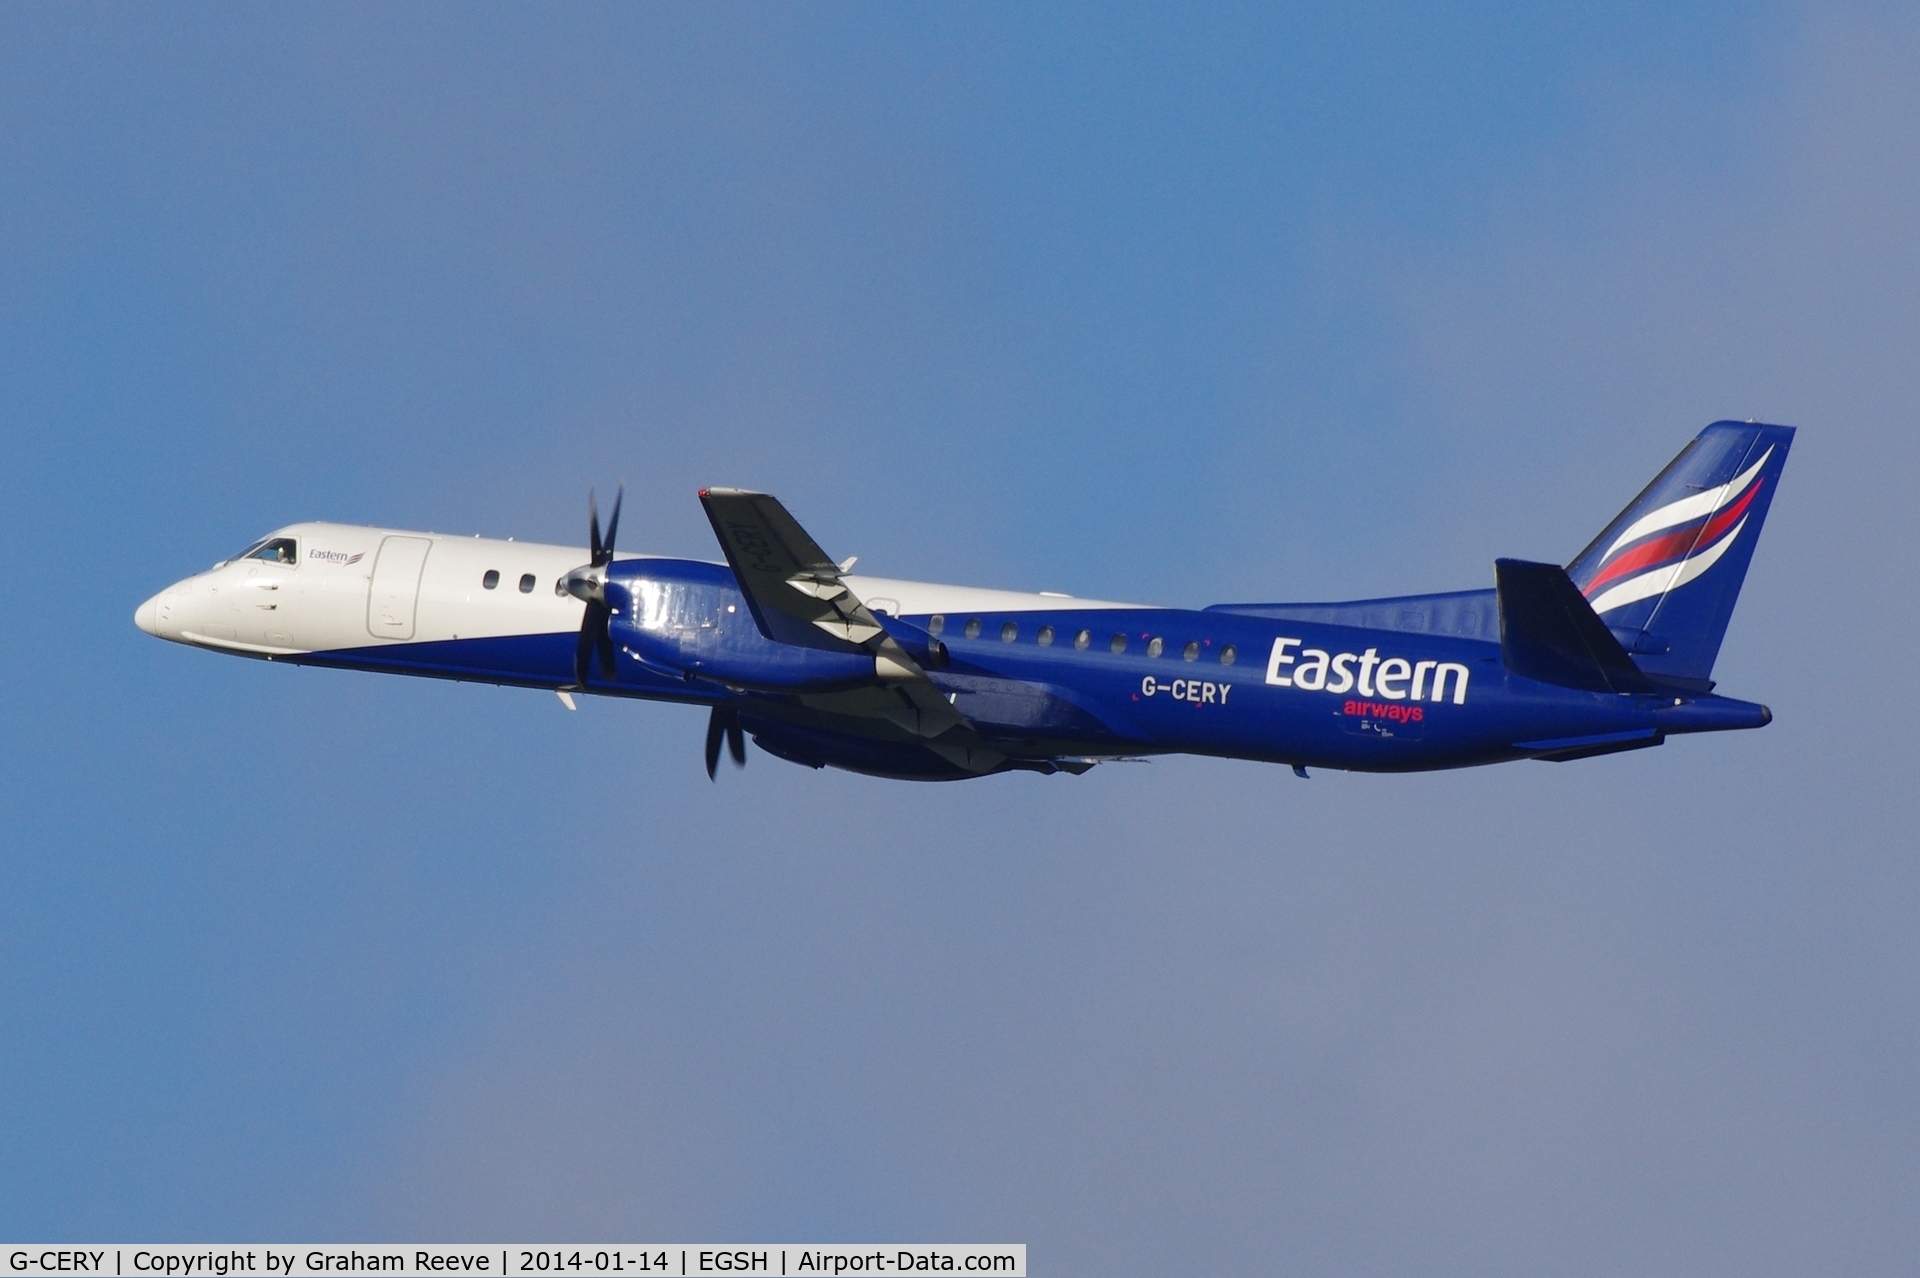 G-CERY, 1994 Saab 2000 C/N 2000-008, Climbing out of Norwich.